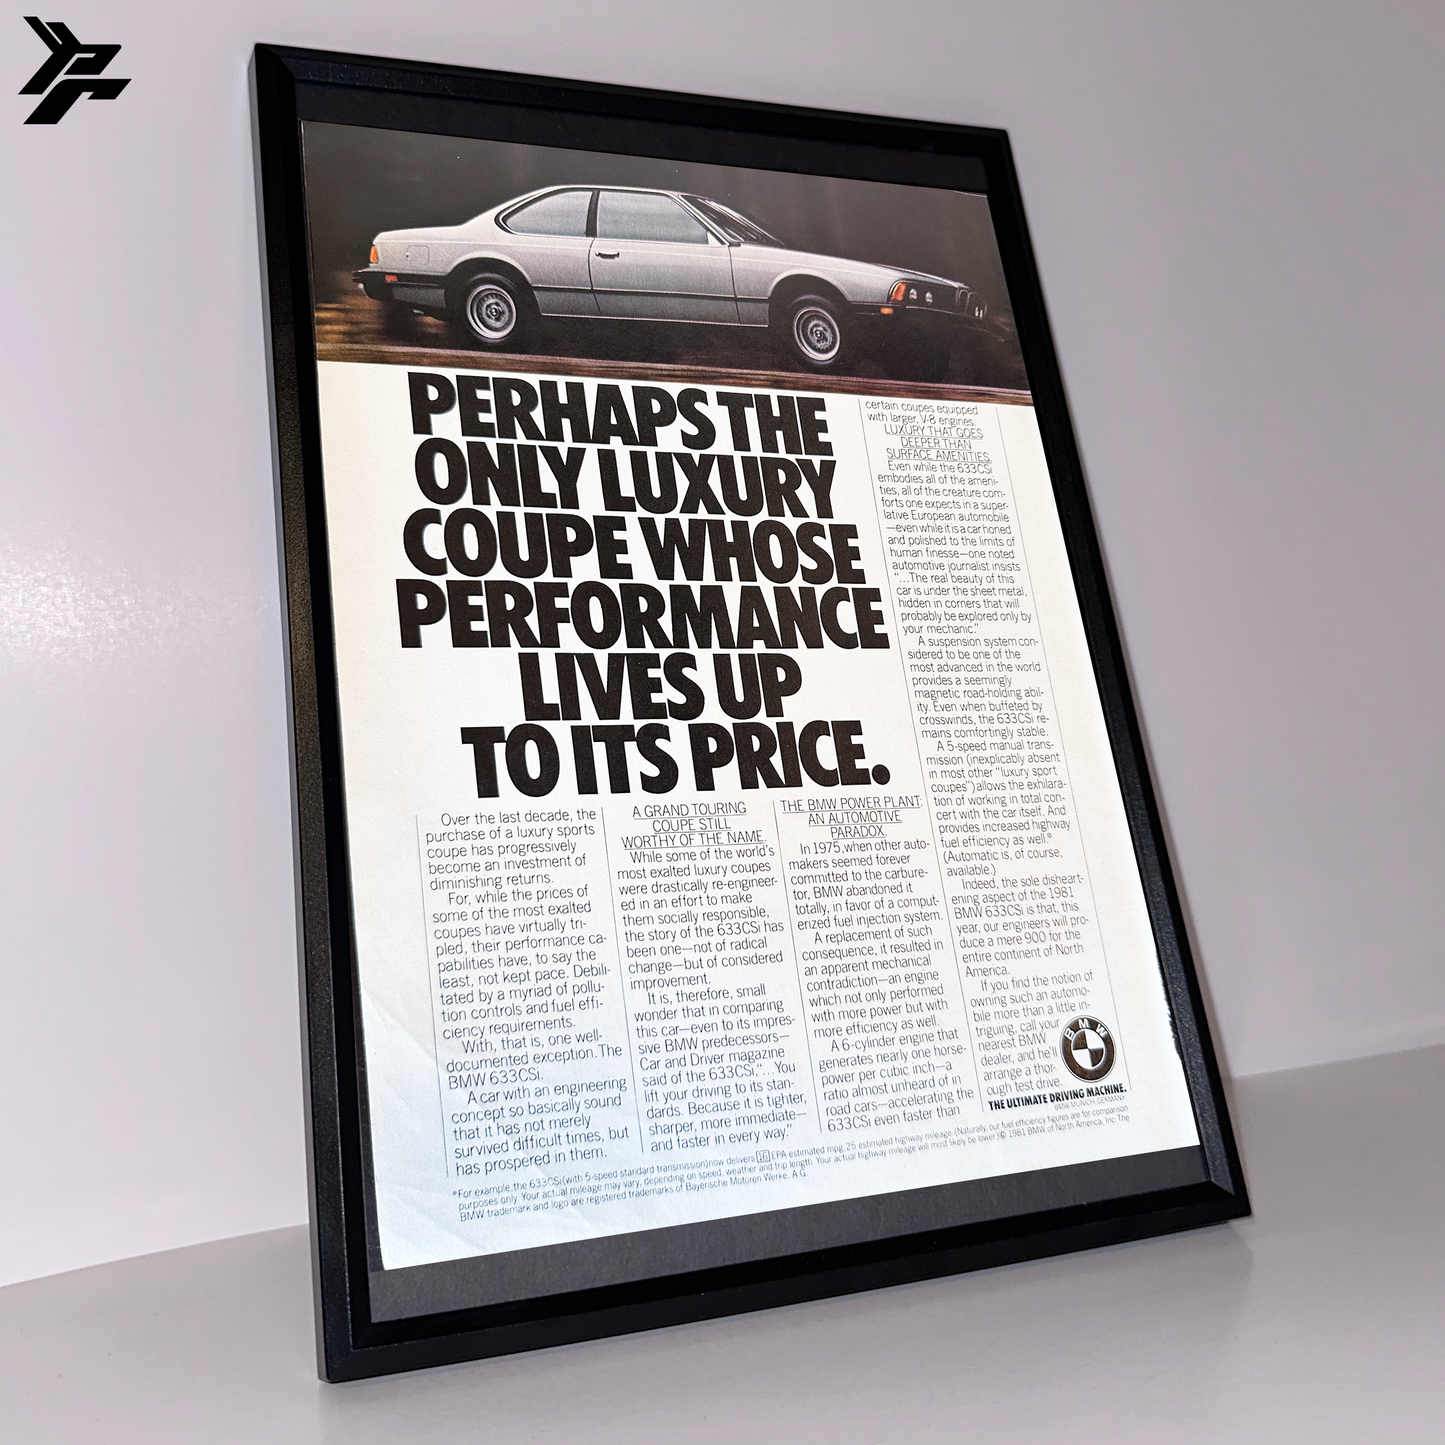 PERHAPS THE ONLY LUXURY bmw e24 framed ad